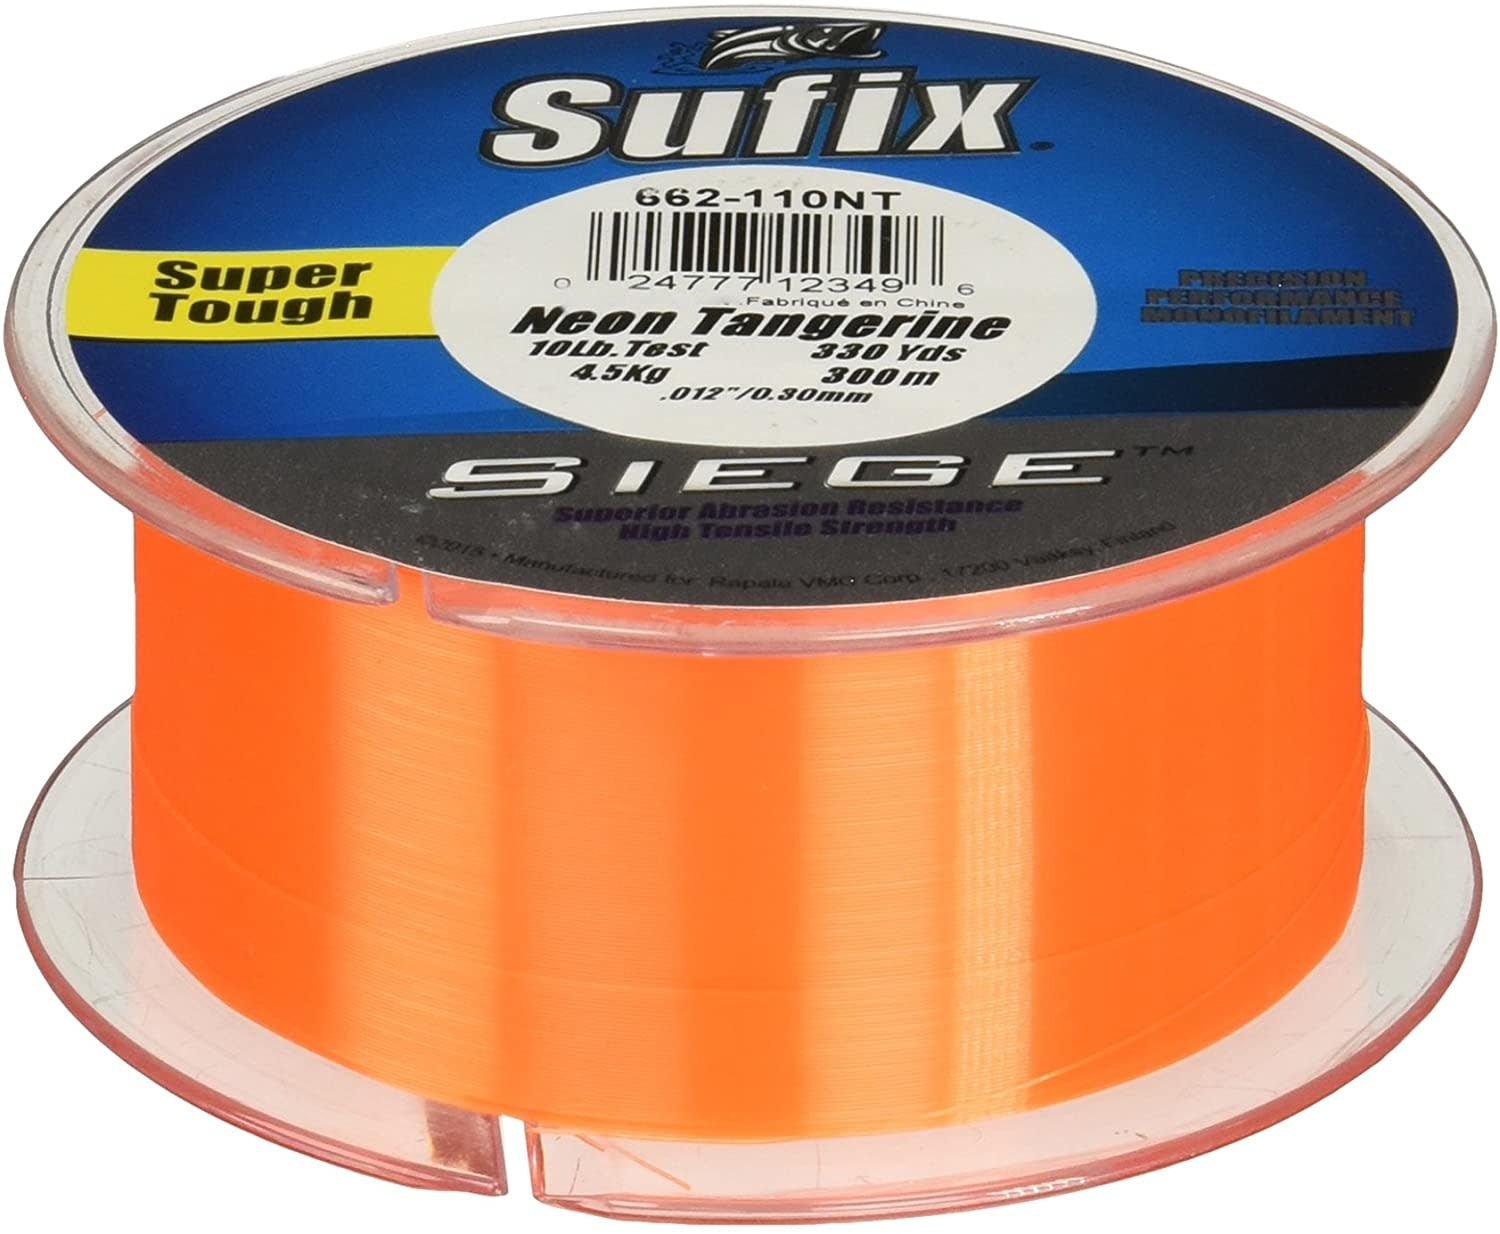 Slime Line Fishing Line - Welcome to the future of extreme high vis fishing  line. Slime Line's High-Vis Slime Green is introduced with a advanced  chemical treatment that offers brighter color,less fade